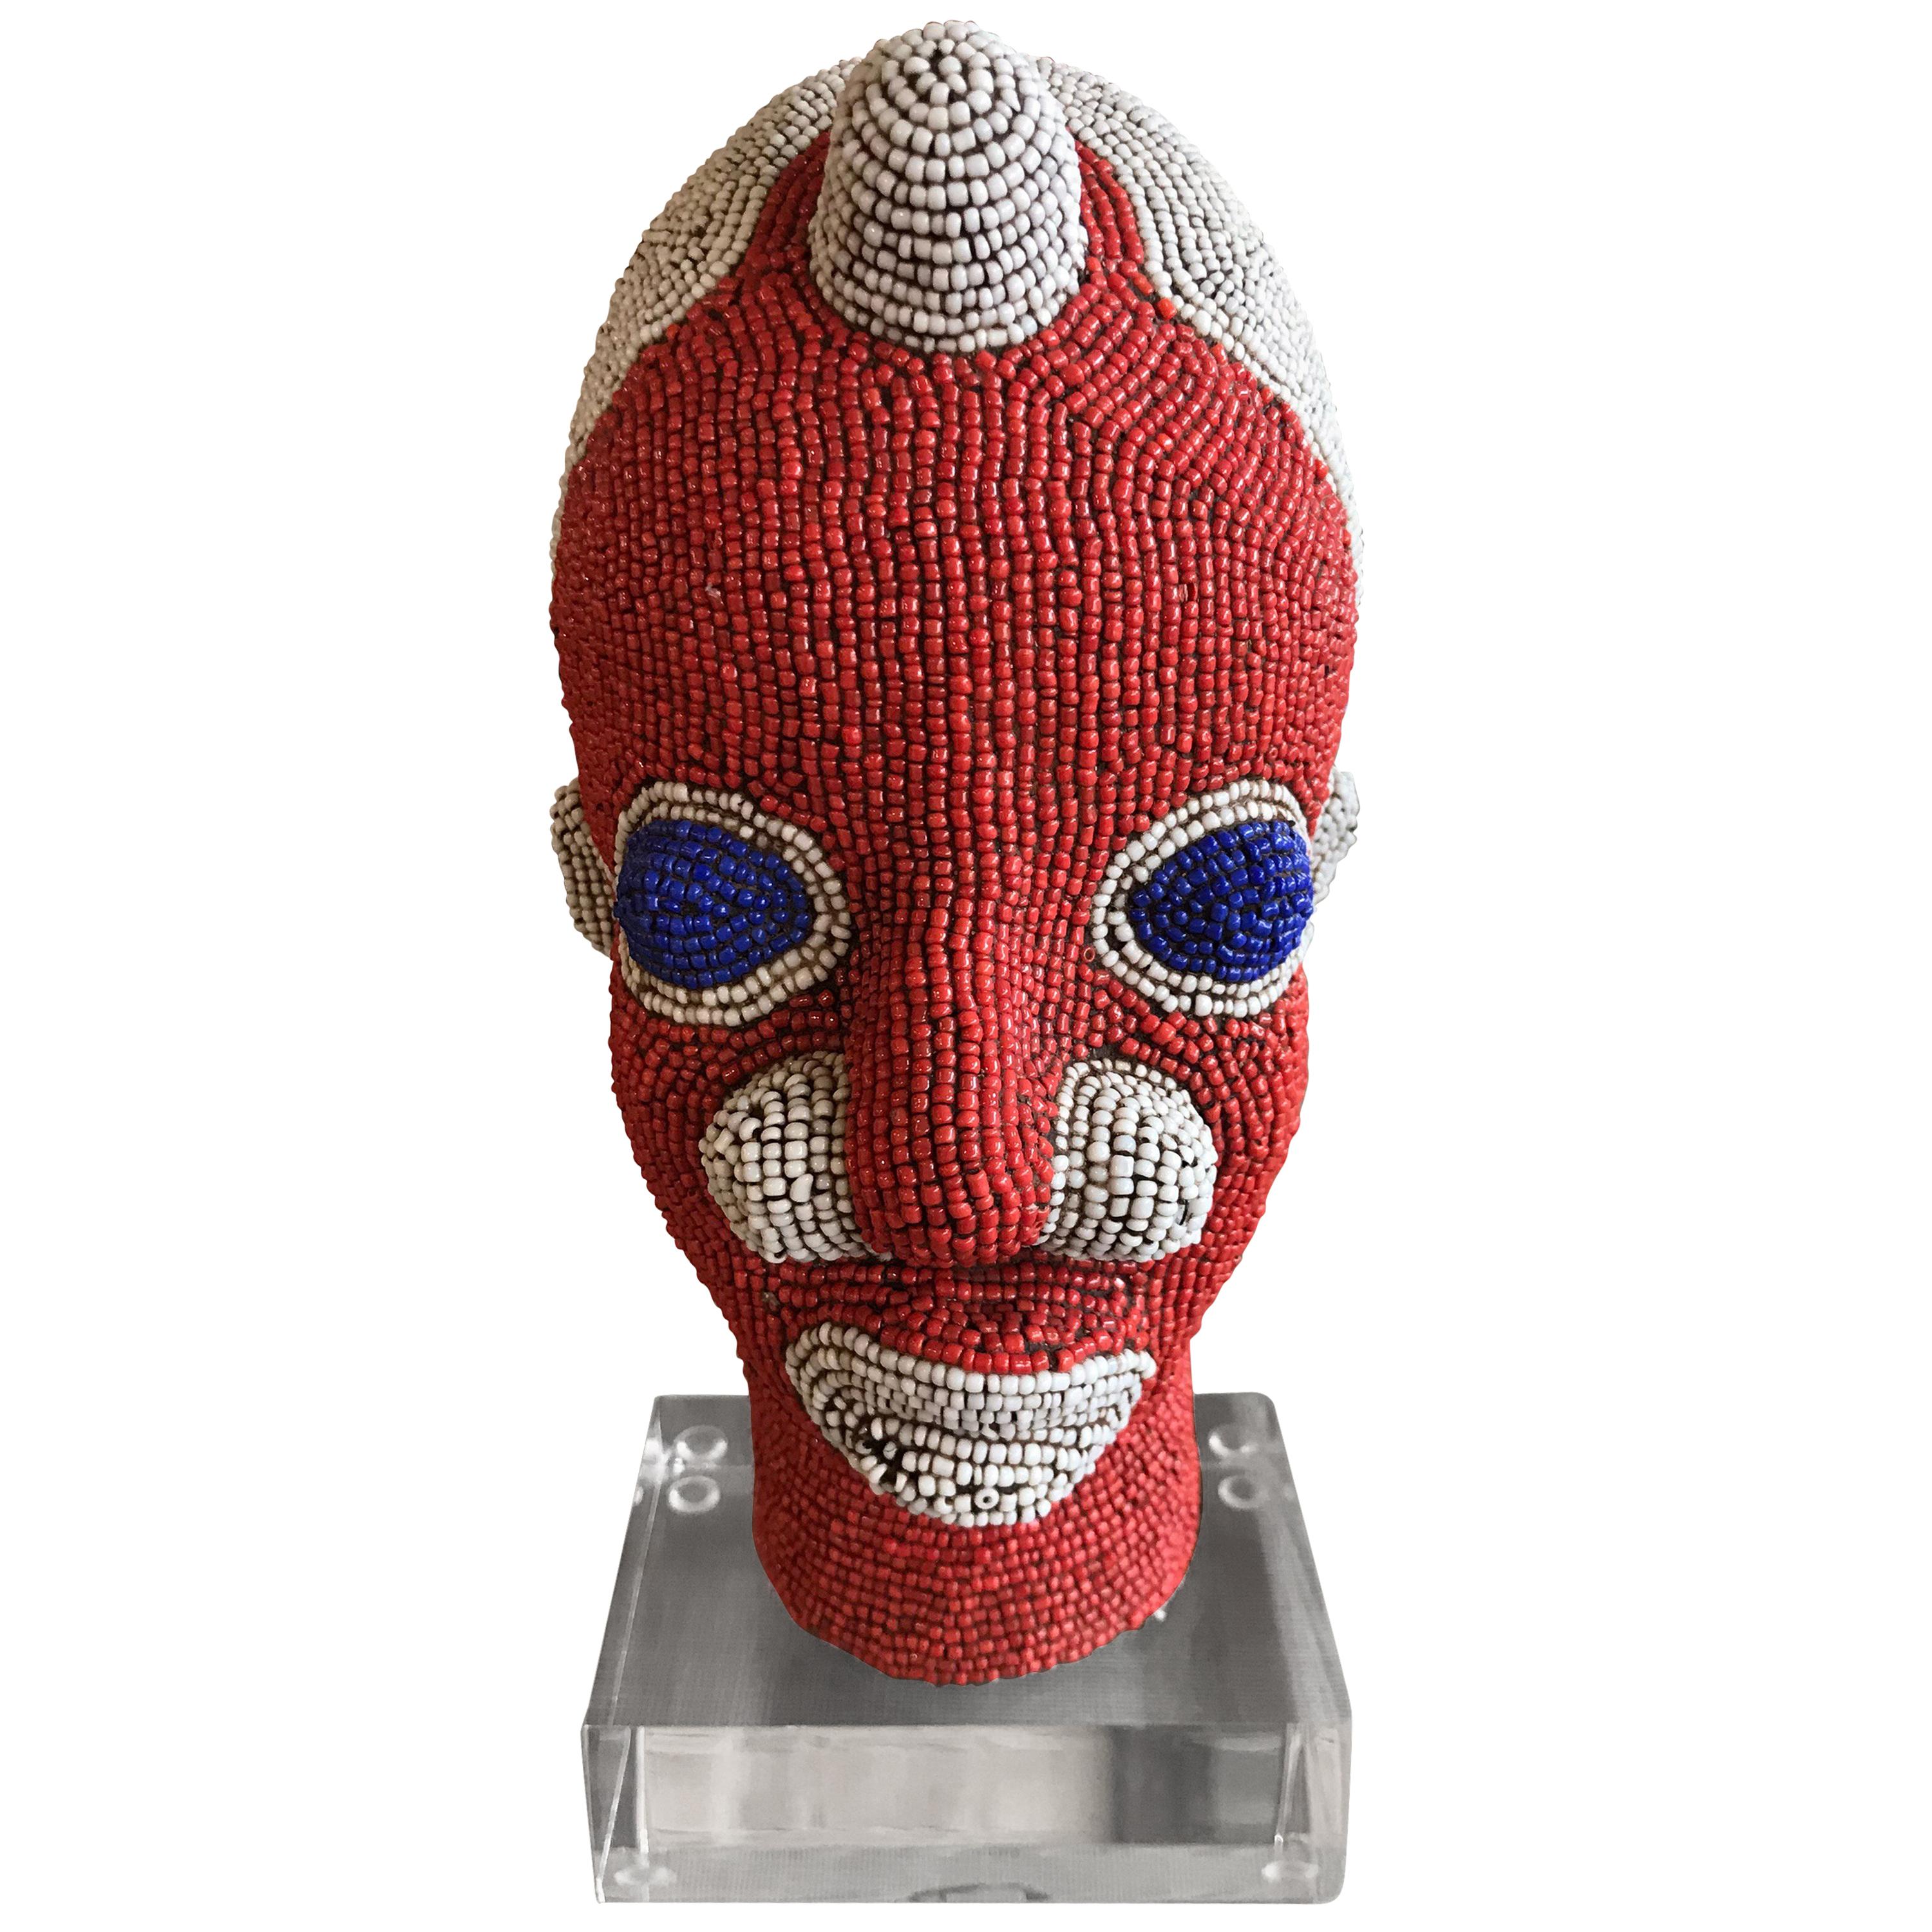 African Beaded Head from Cameroon